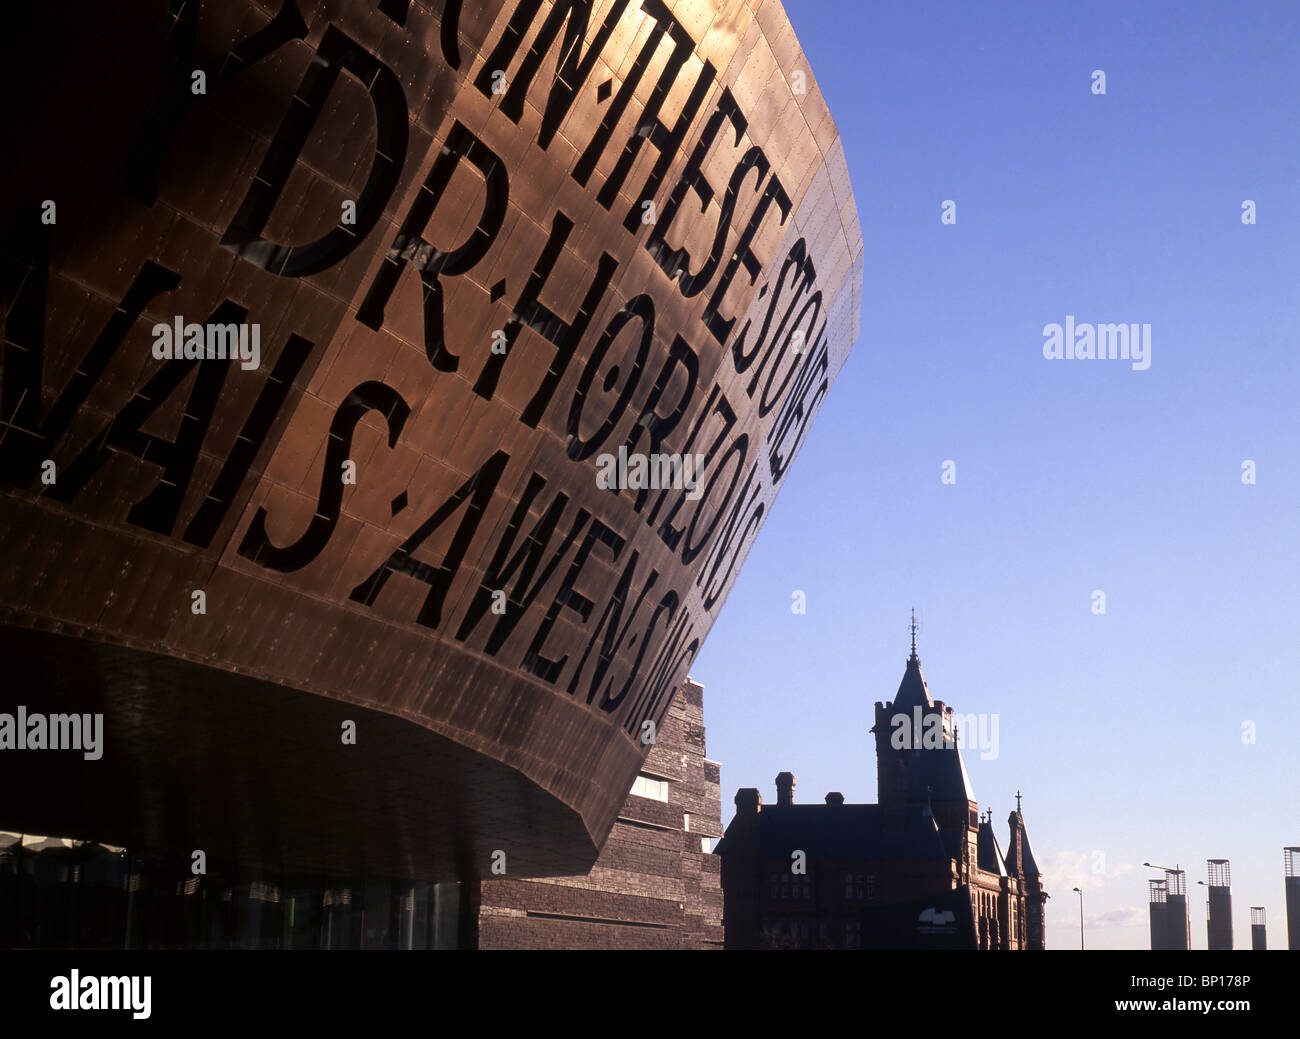 Wales Millennium Centre and facade with Pierhead Building in background Cardiff Bay South Wales UK Stock Photo